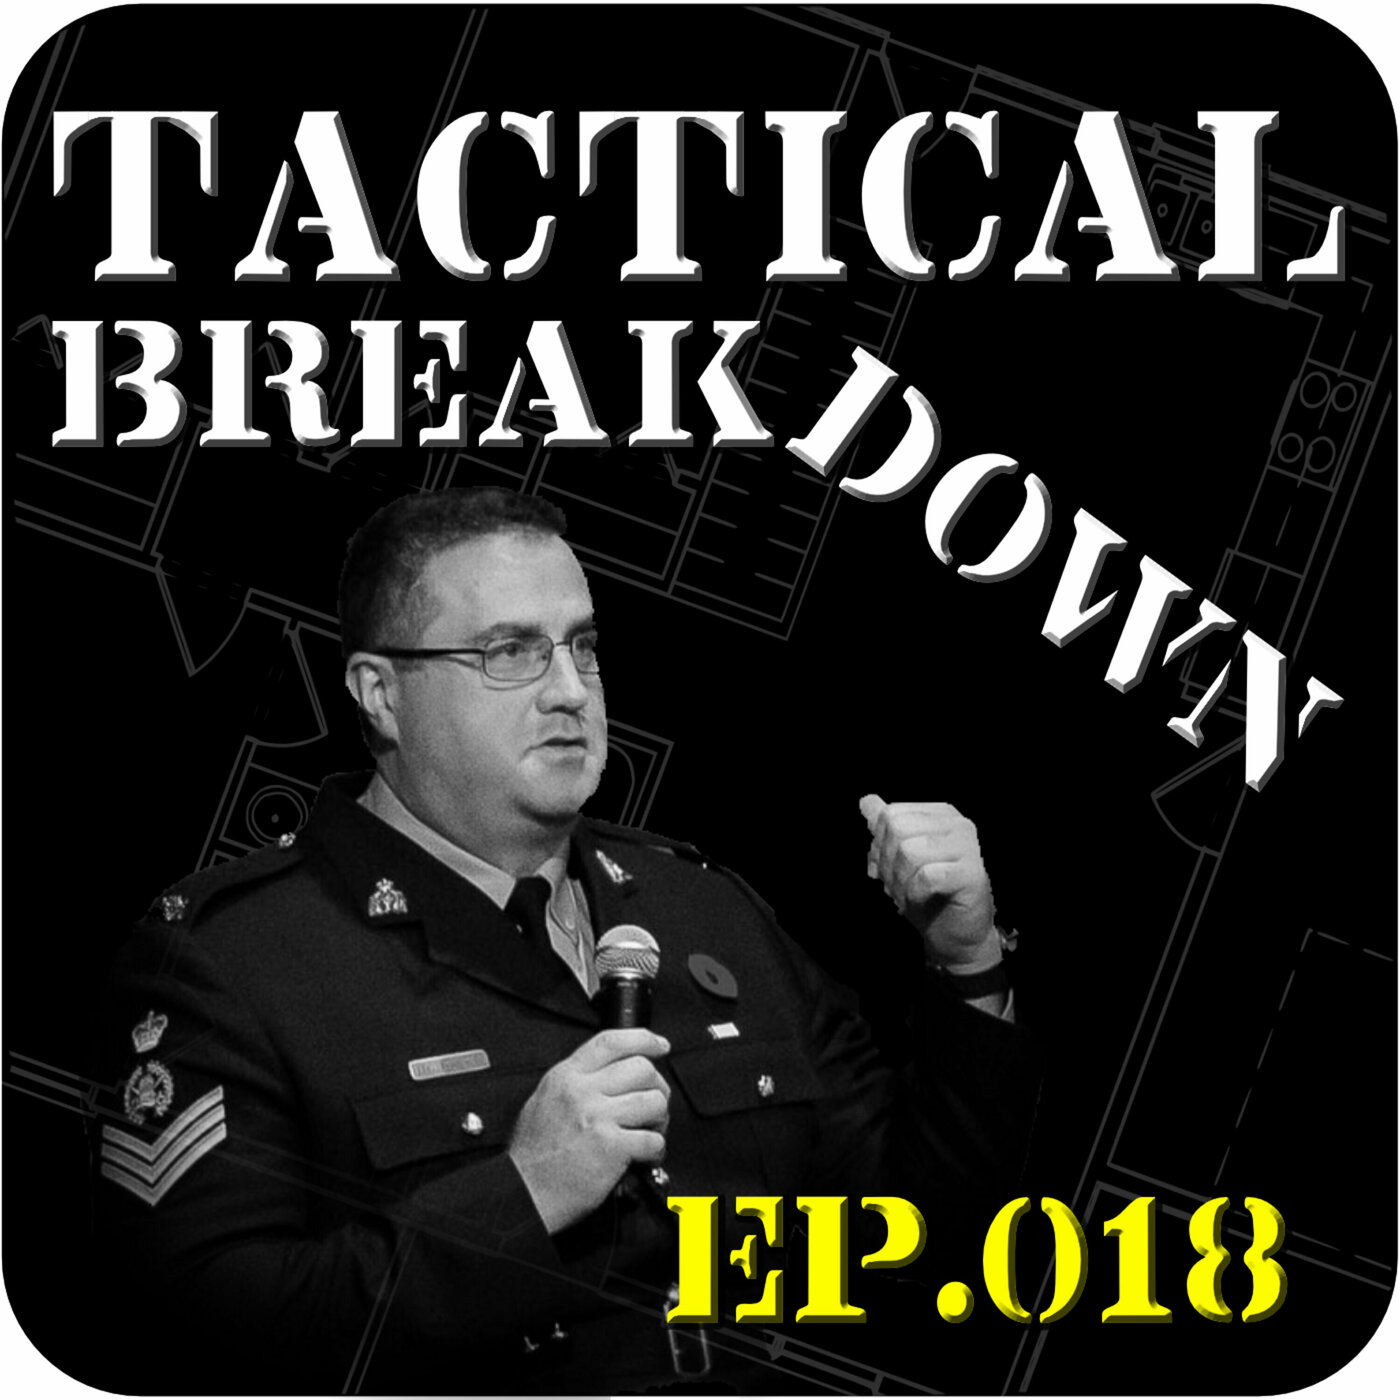 Public Order Policing, Riots, and Response with Sgt. Darwin Tetreault